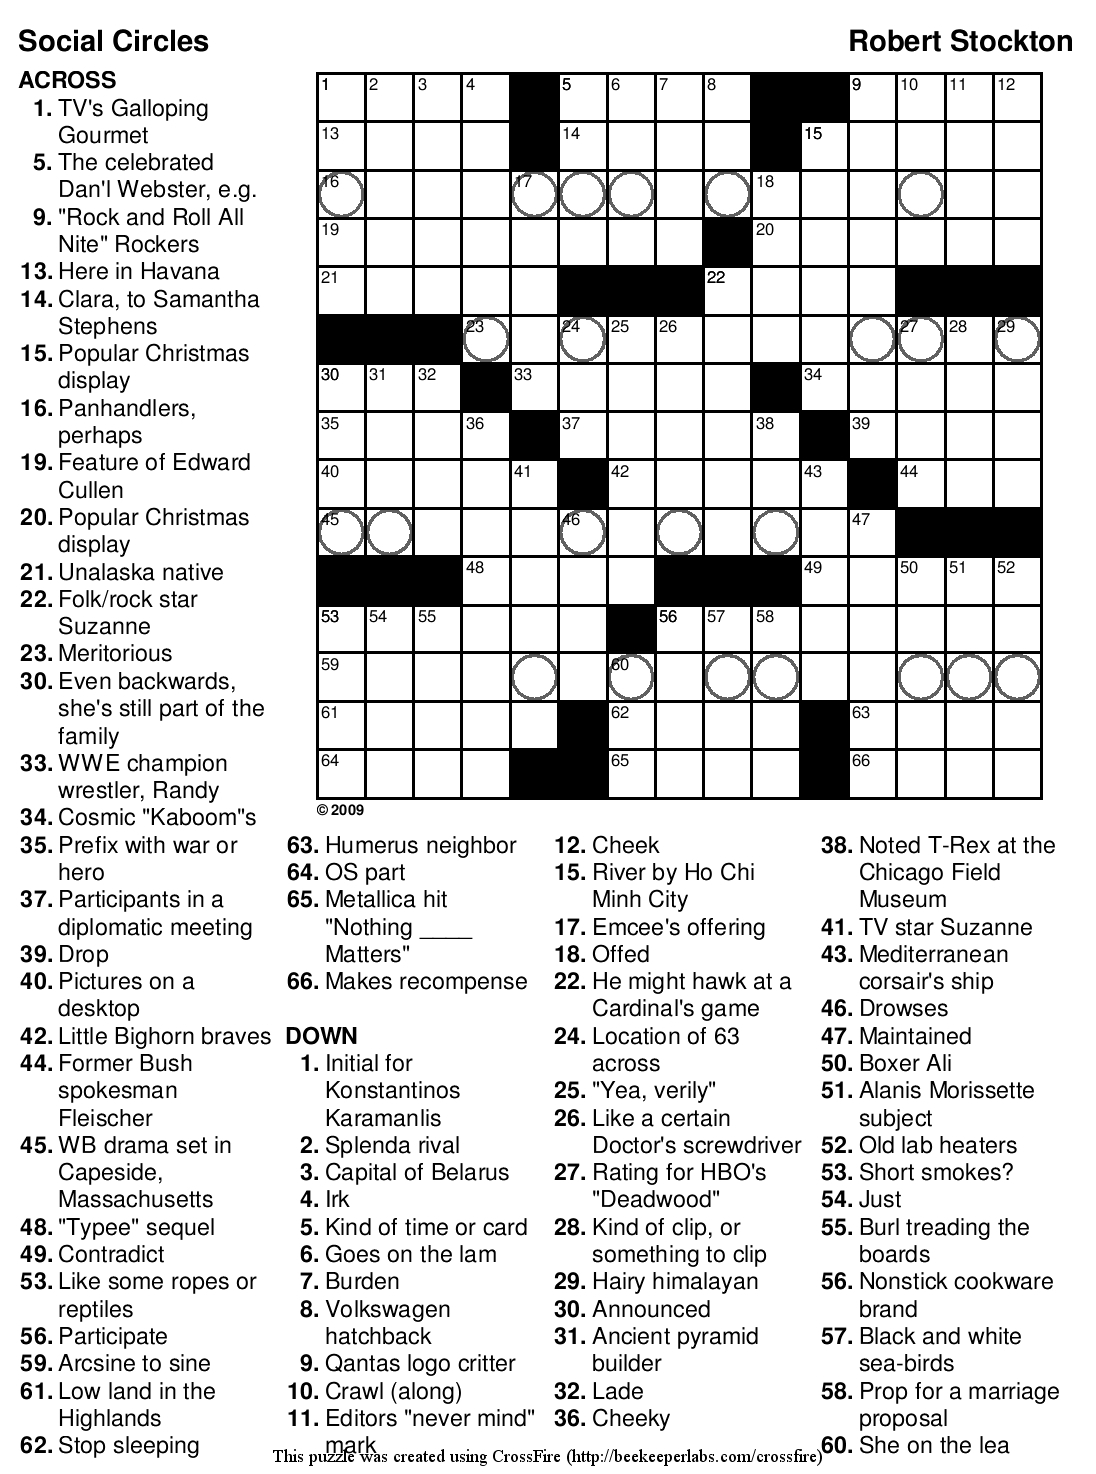 Crossword Puzzles Printable - Yahoo Image Search Results | Crossword - Newspaper Crossword Puzzles Printable Uk